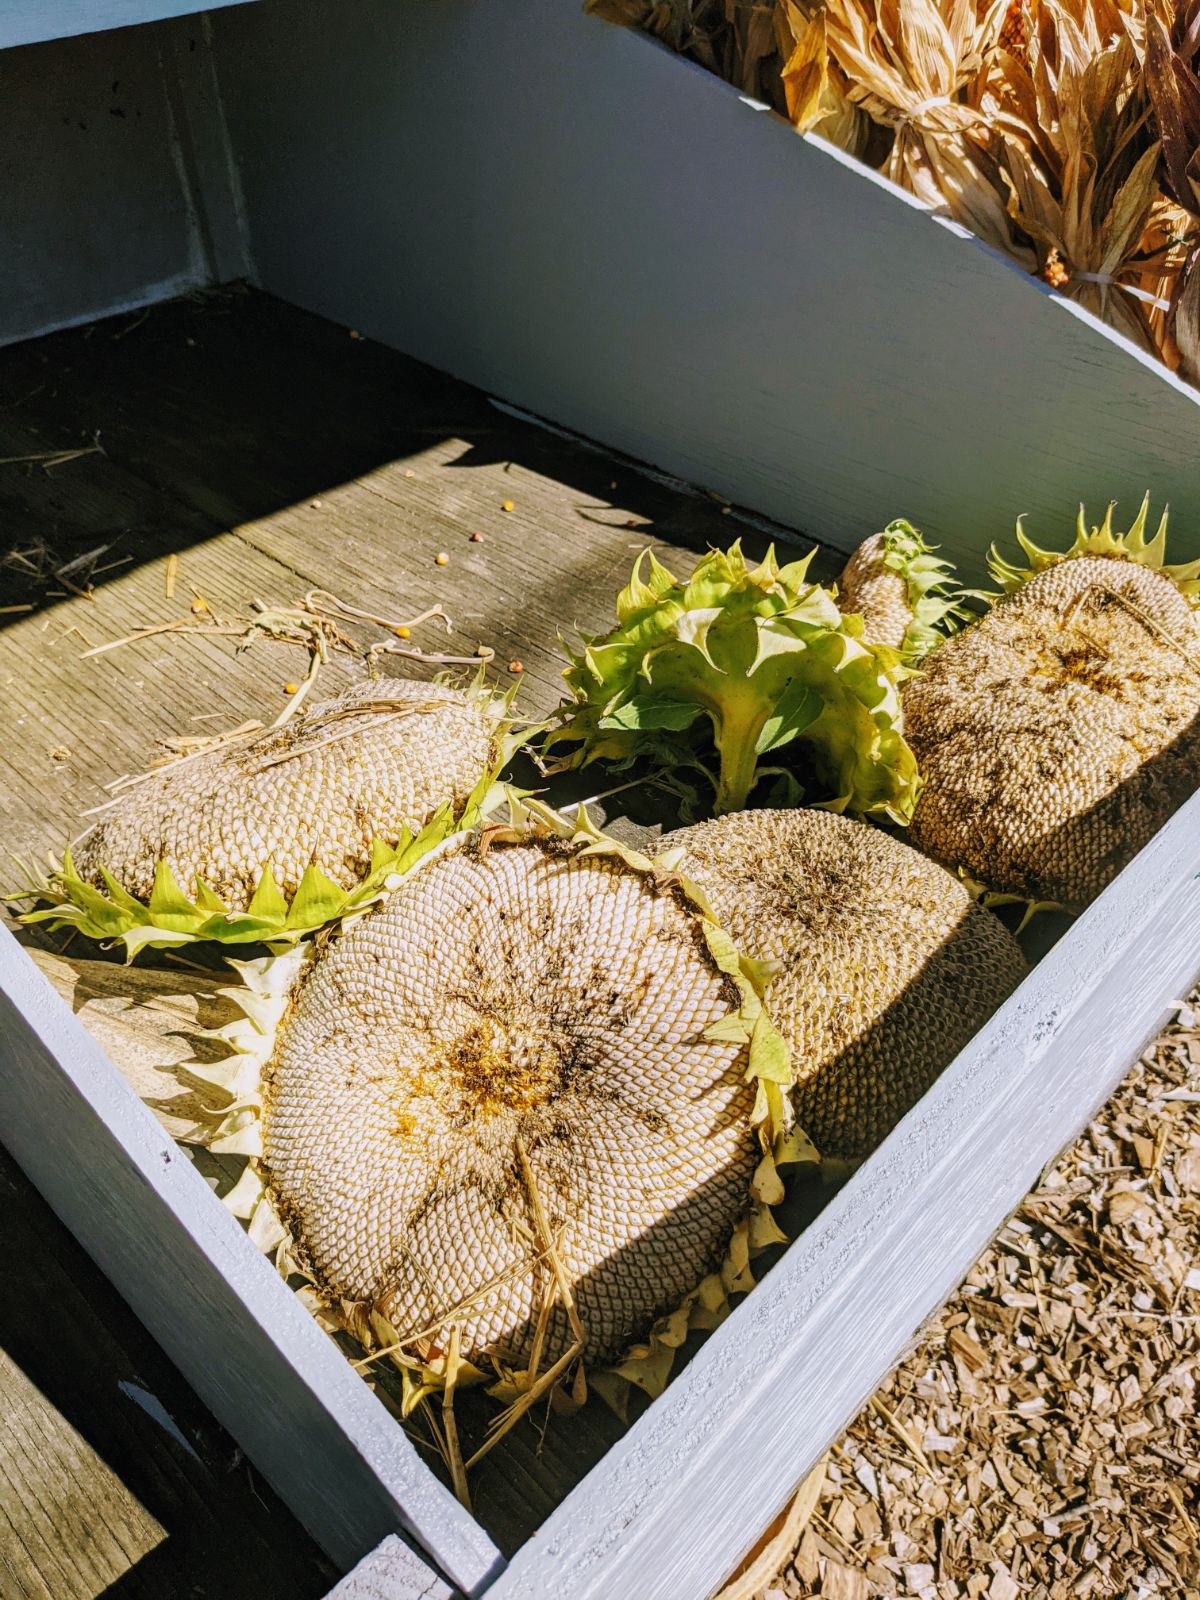 Large dry sunflower seed heads in a bin